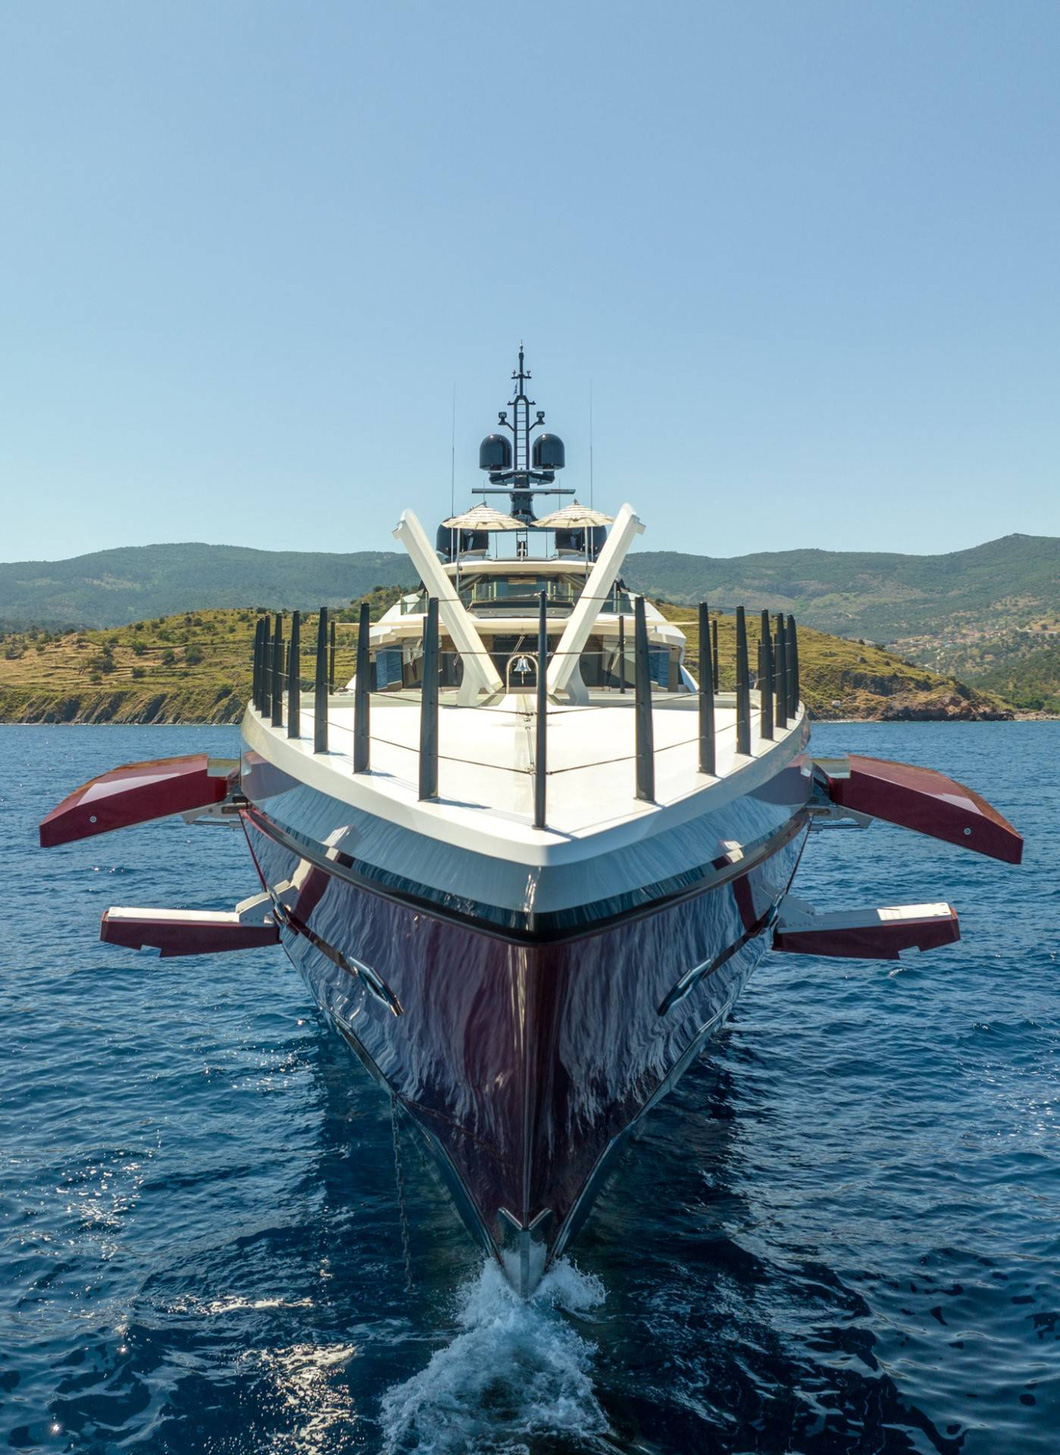 2,560 kW MTU twin engines power the 80 meter long vessel, allowing it to reach a maximum speed of 19 knots.